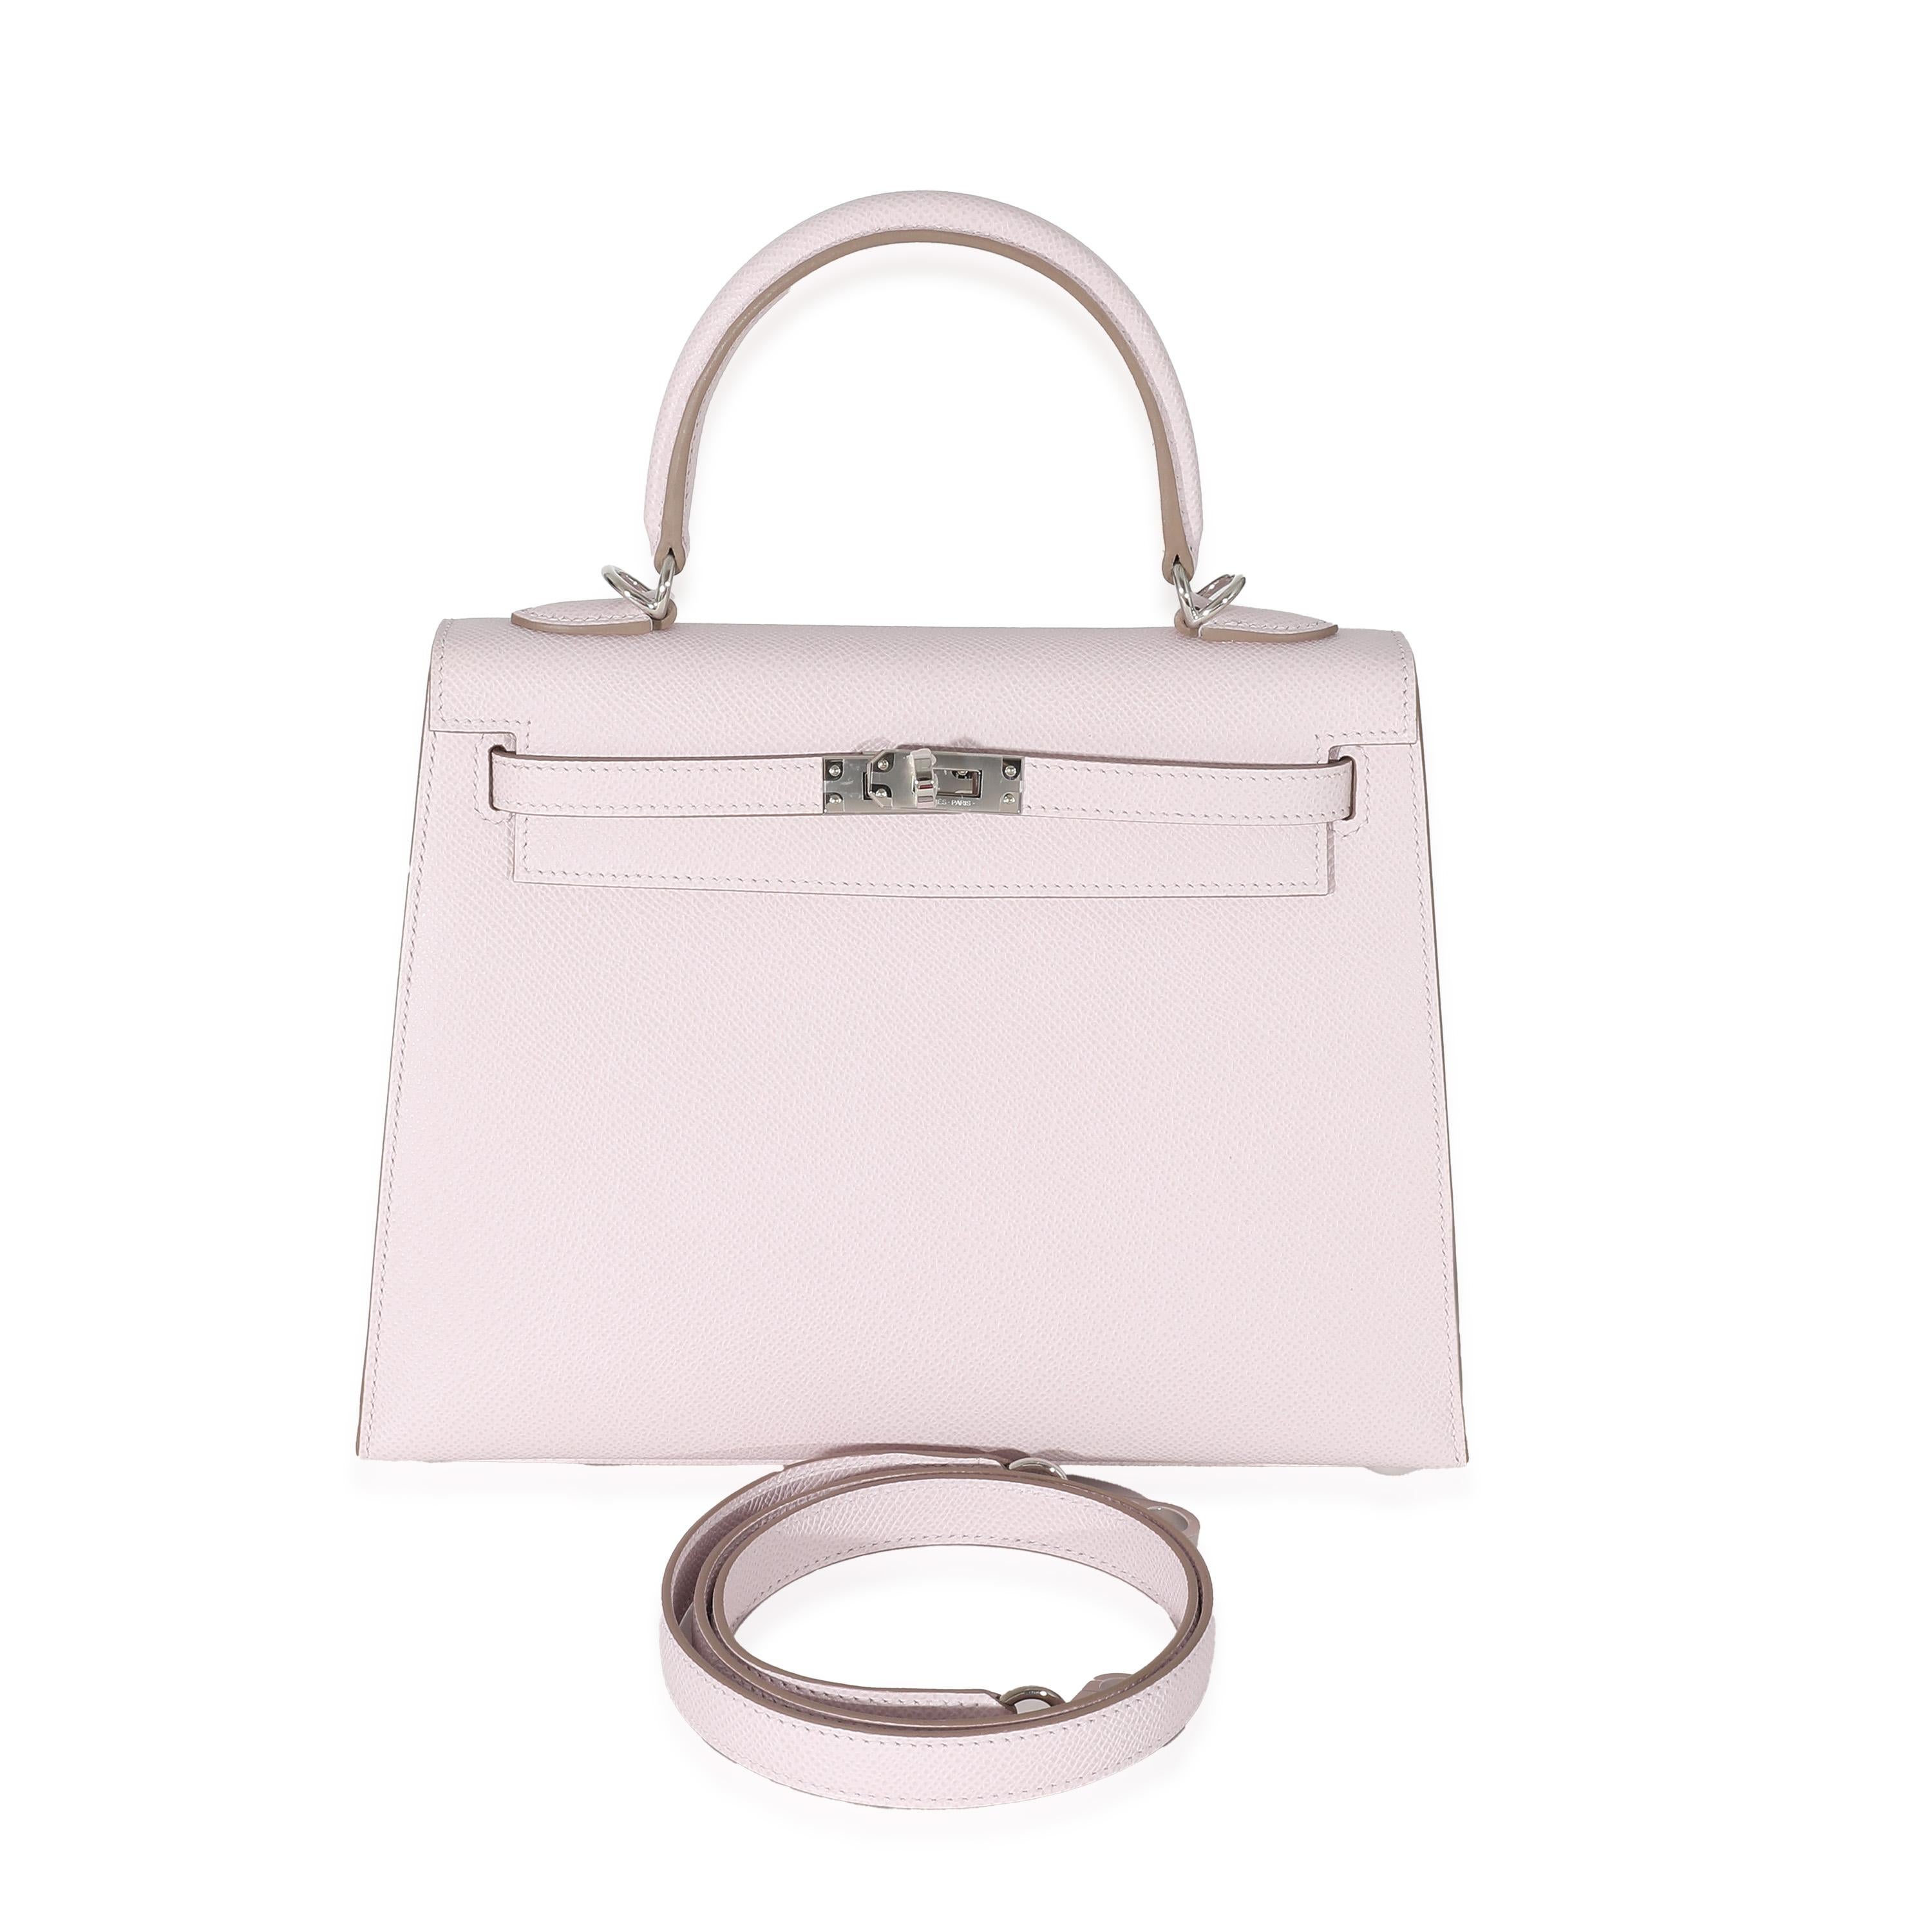 Listing Title: Hermes Mauve Pale Epsom Kelly Sellier 25 PHW
SKU: Z134148
Condition: Pre-owned 
Handbag Condition: Pristine
Condition Comments: Item has no indication of wear. Plastic along hardware.
Brand: Hermès
Model: Kelly Sellier 25
Origin